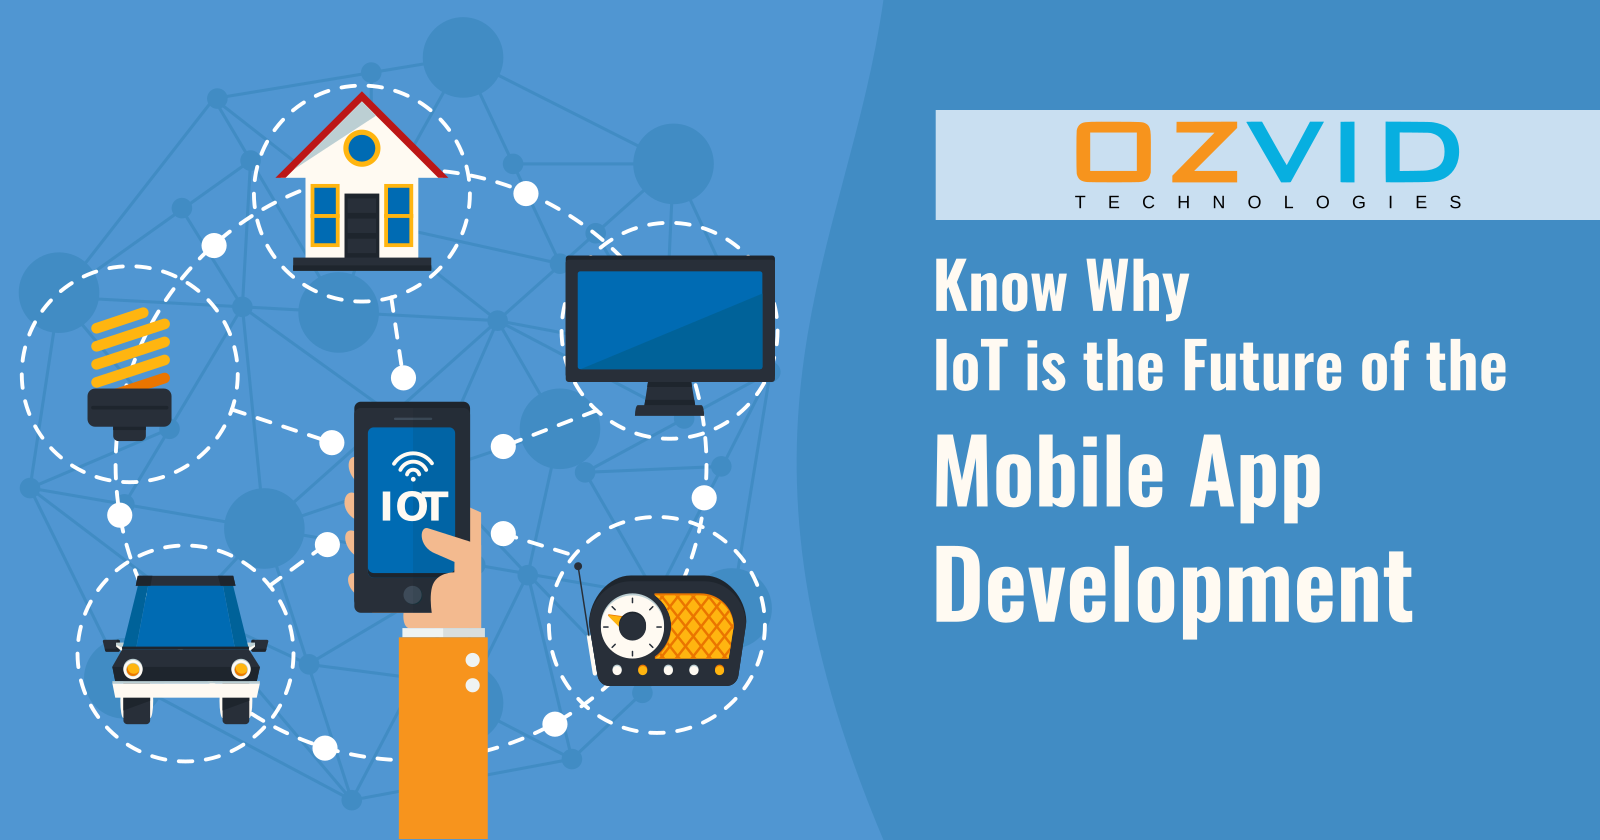 Know Why IoT is the Future of the Mobile App Development